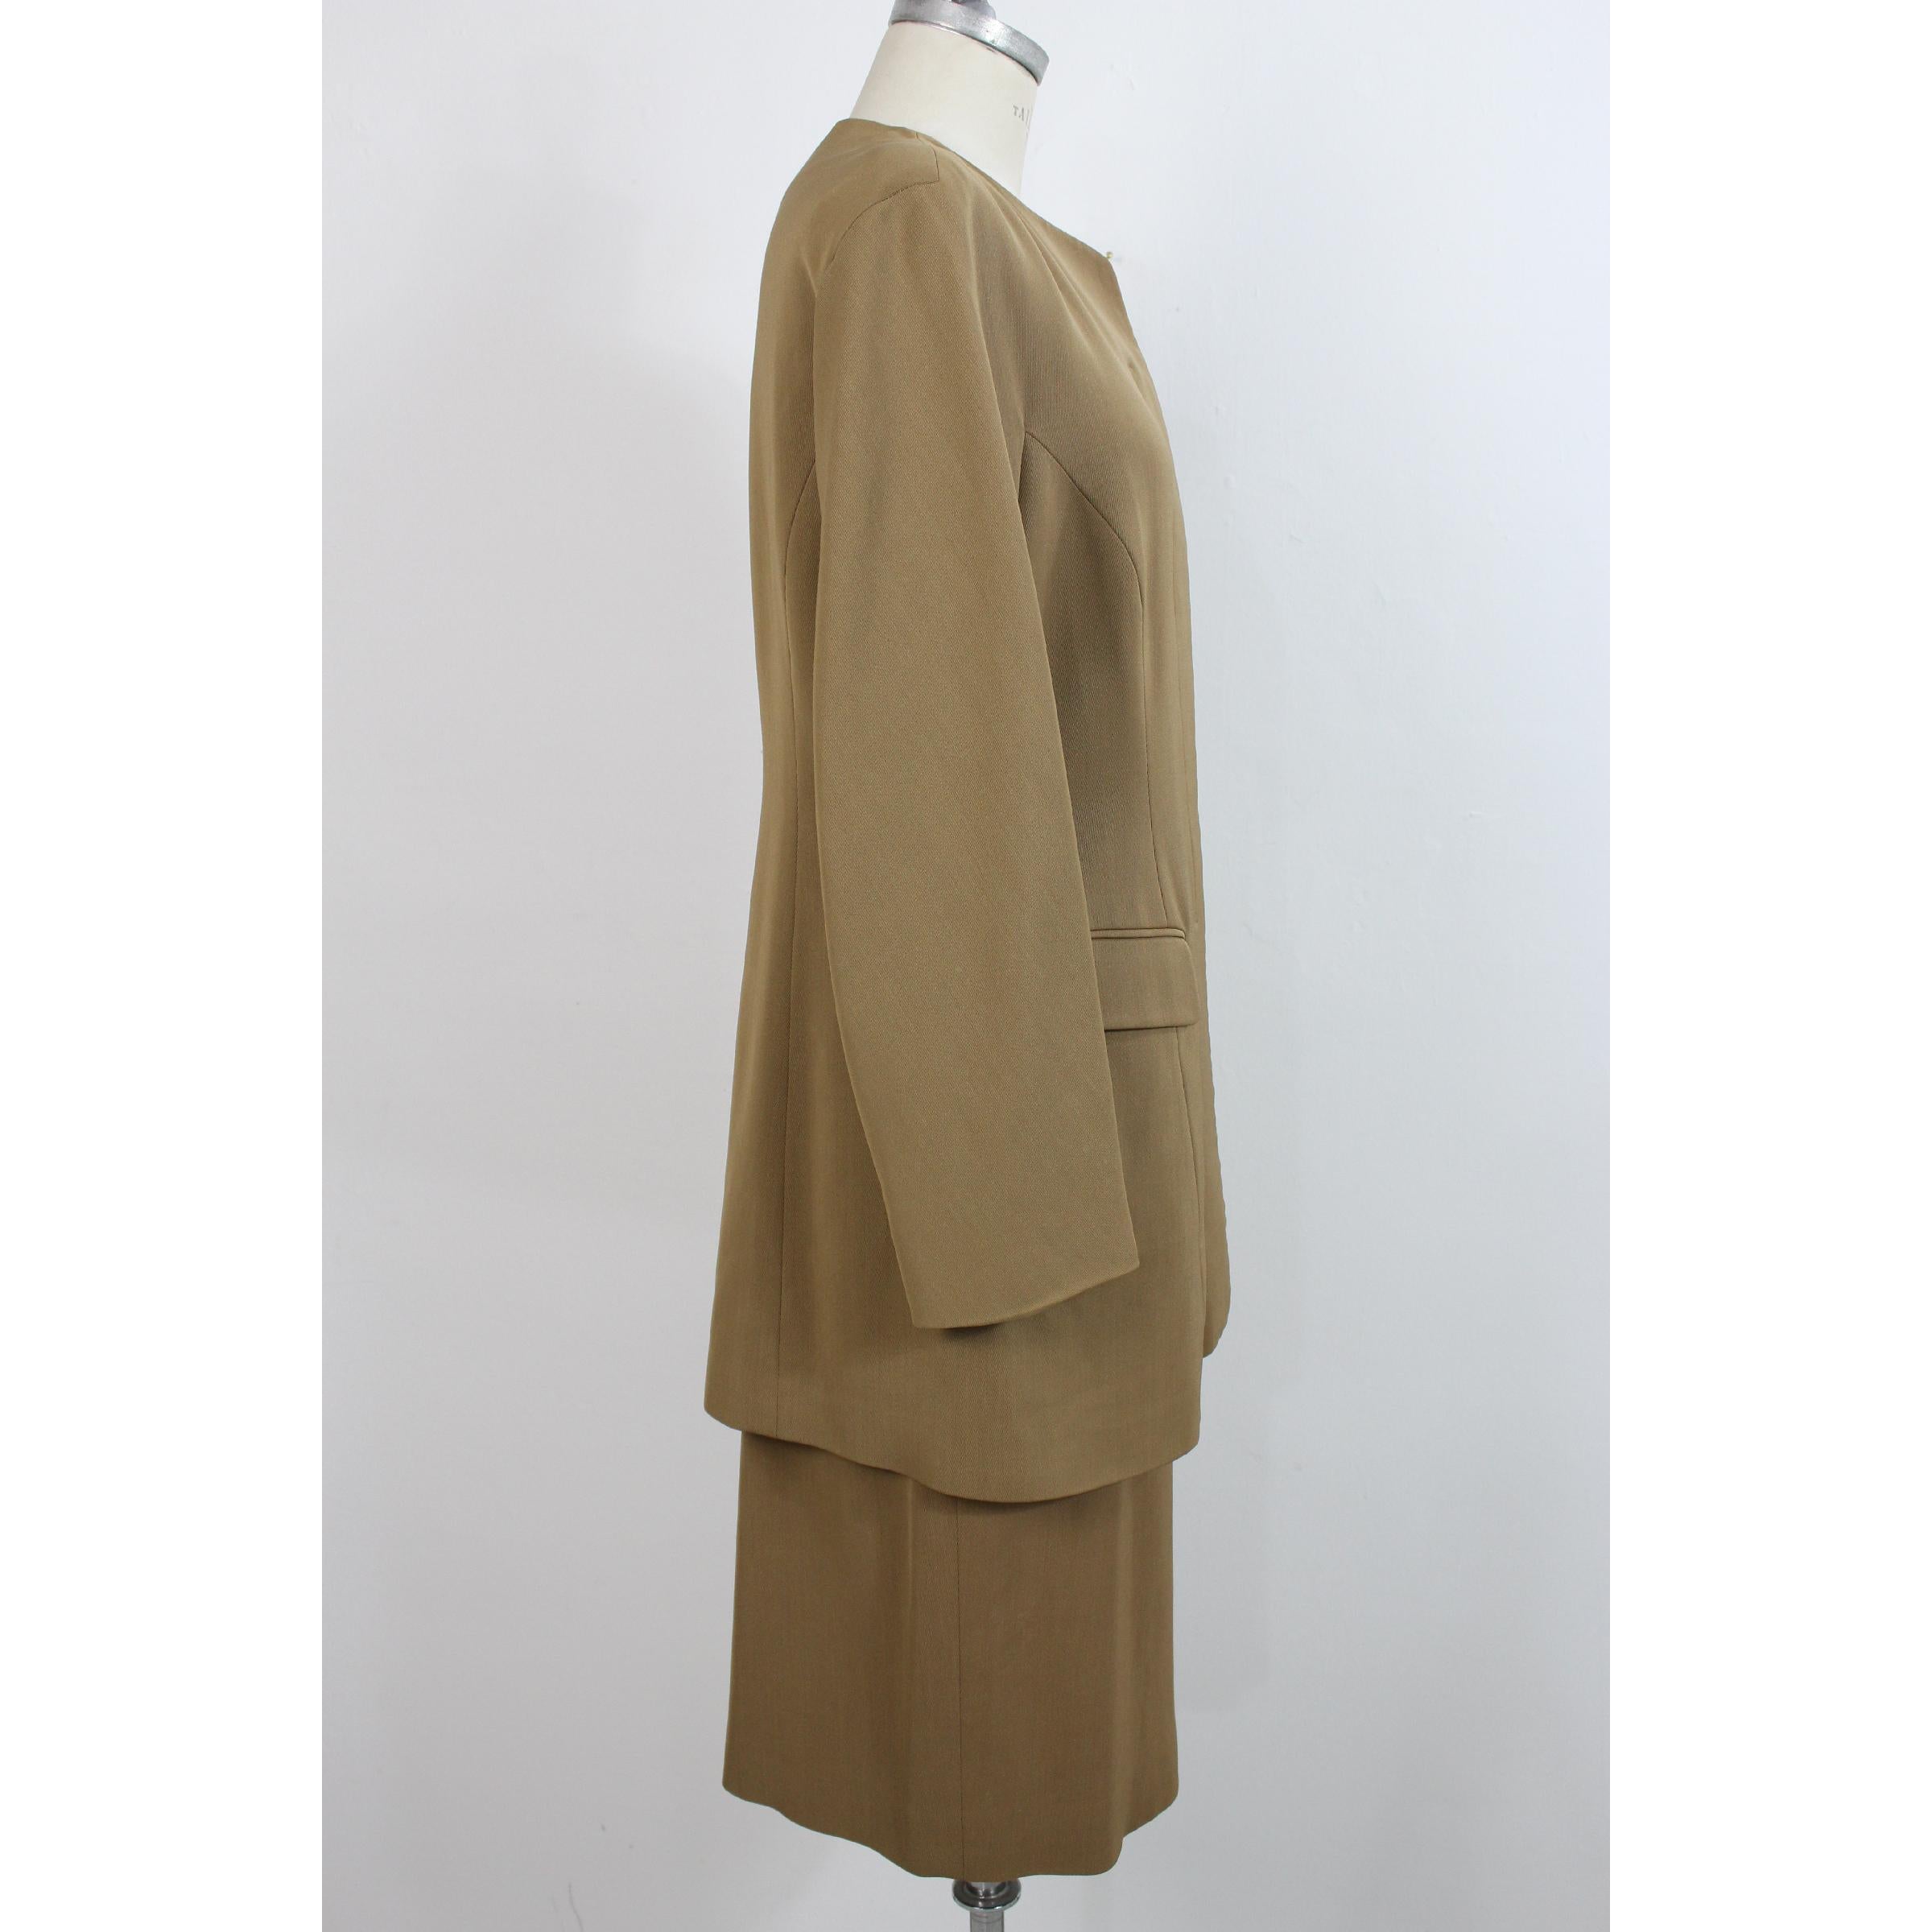 Jil Sander Beige Silk Cashmere Classic Suit Skirt In Good Condition For Sale In Brindisi, Bt